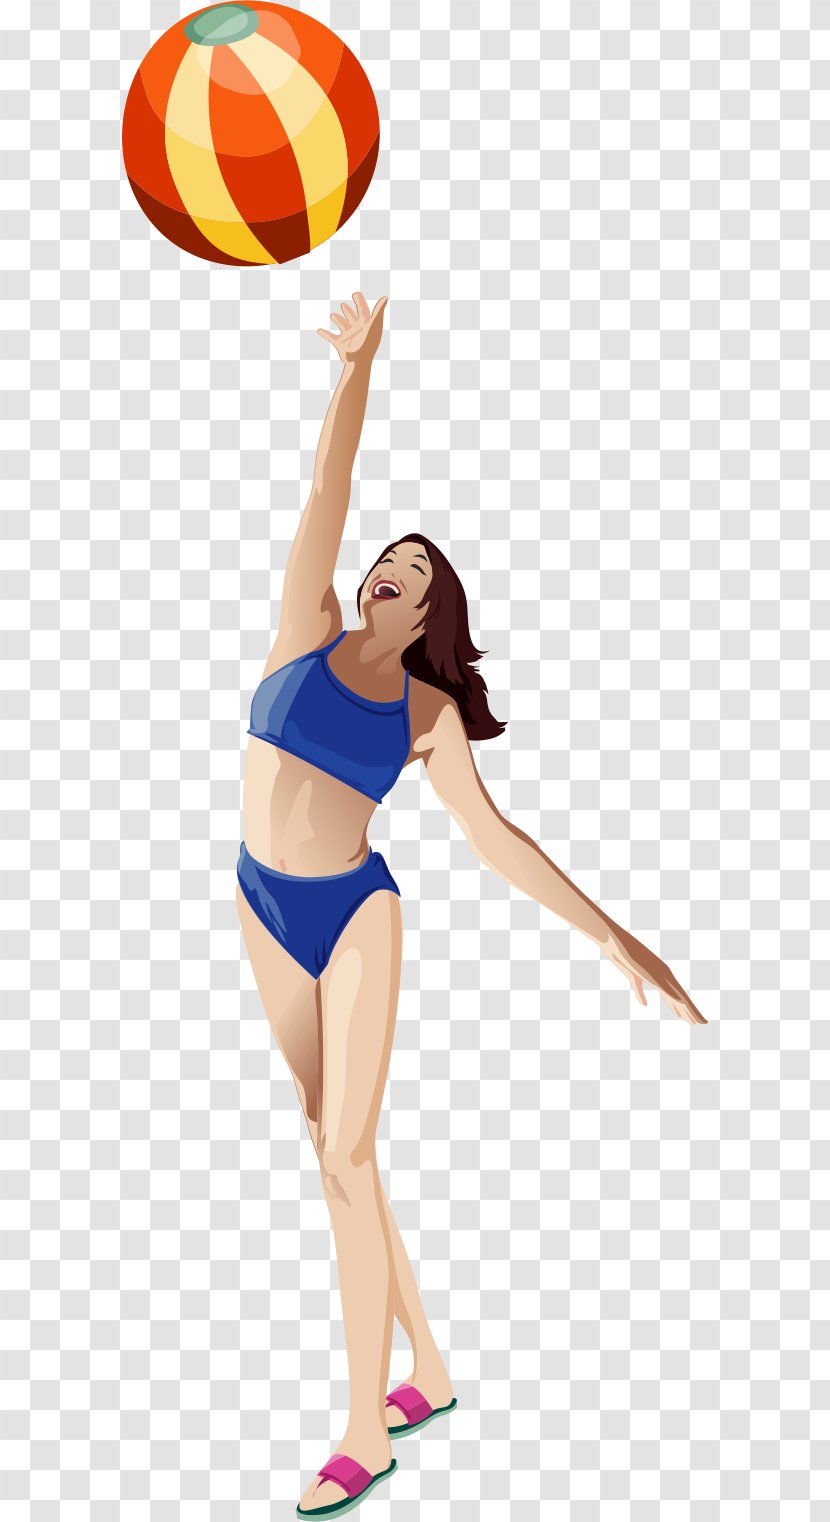 Illustration - Heart - Volleyball Beauty Transparent PNG